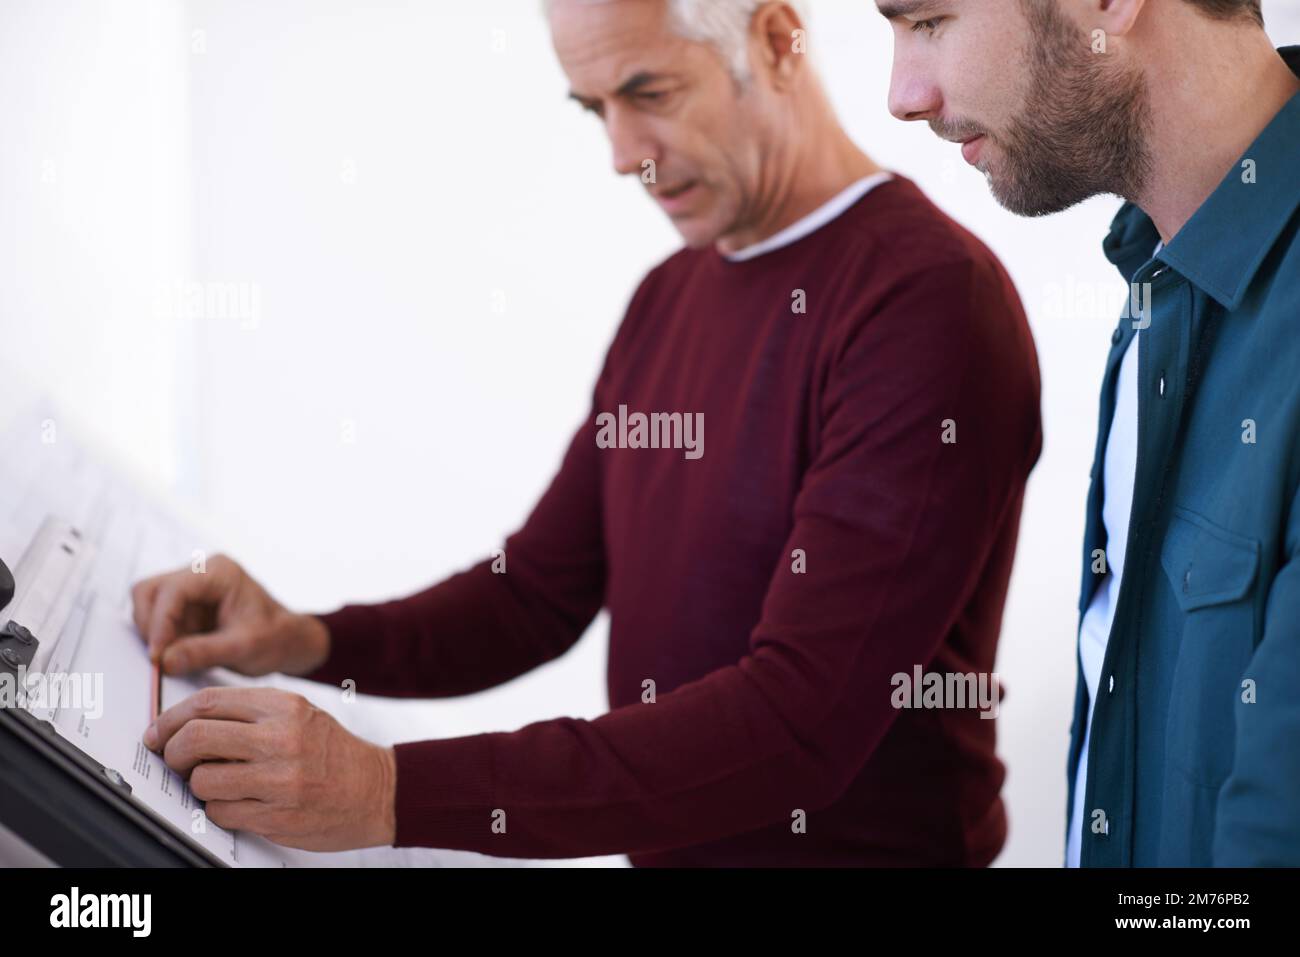 Some advice from an experienced colleague. two male architects working on a building plan at a drawing board. Stock Photo